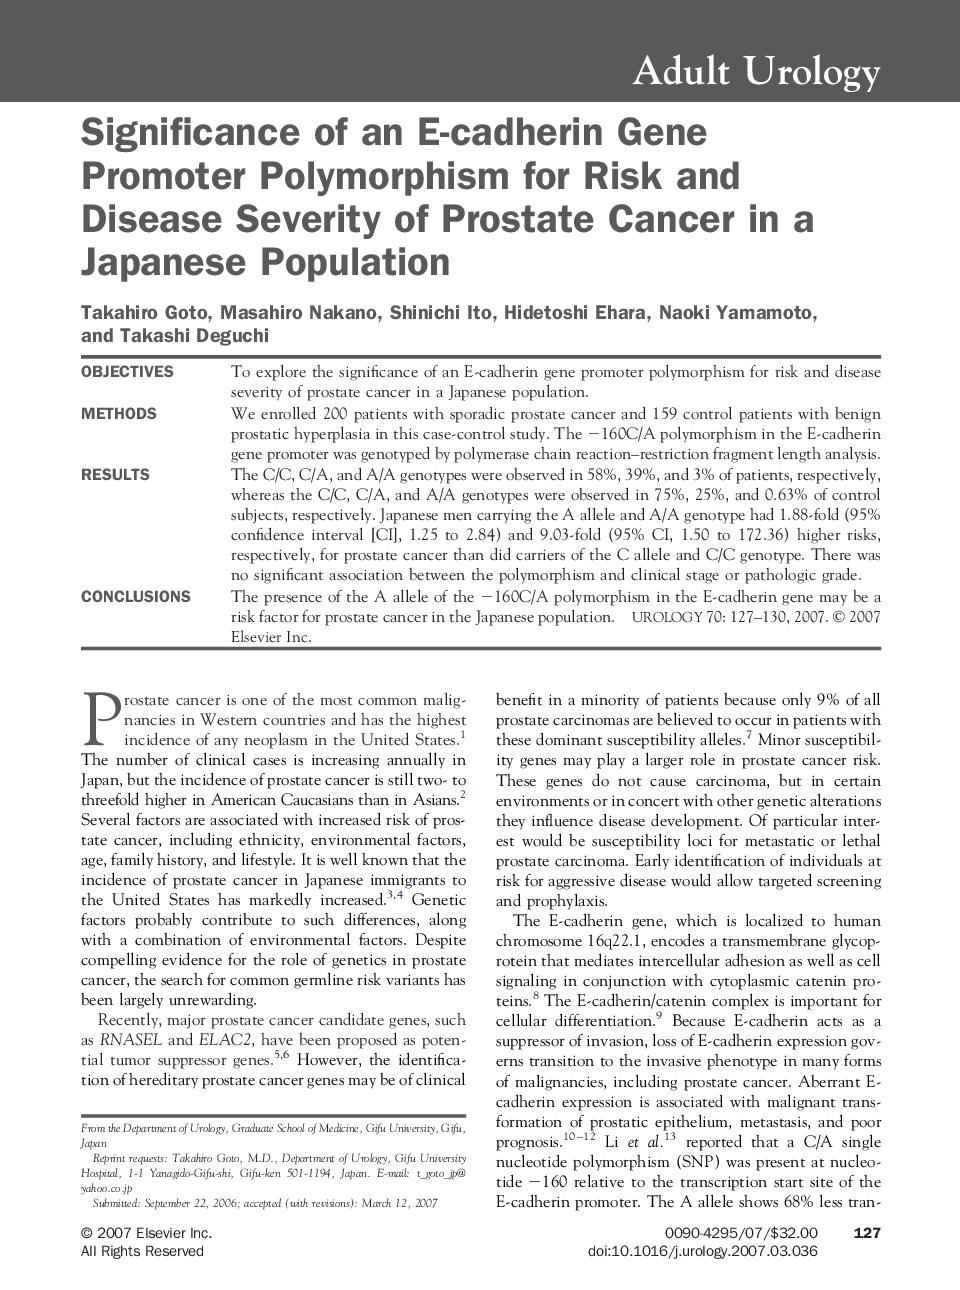 Significance of an E-cadherin Gene Promoter Polymorphism for Risk and Disease Severity of Prostate Cancer in a Japanese Population